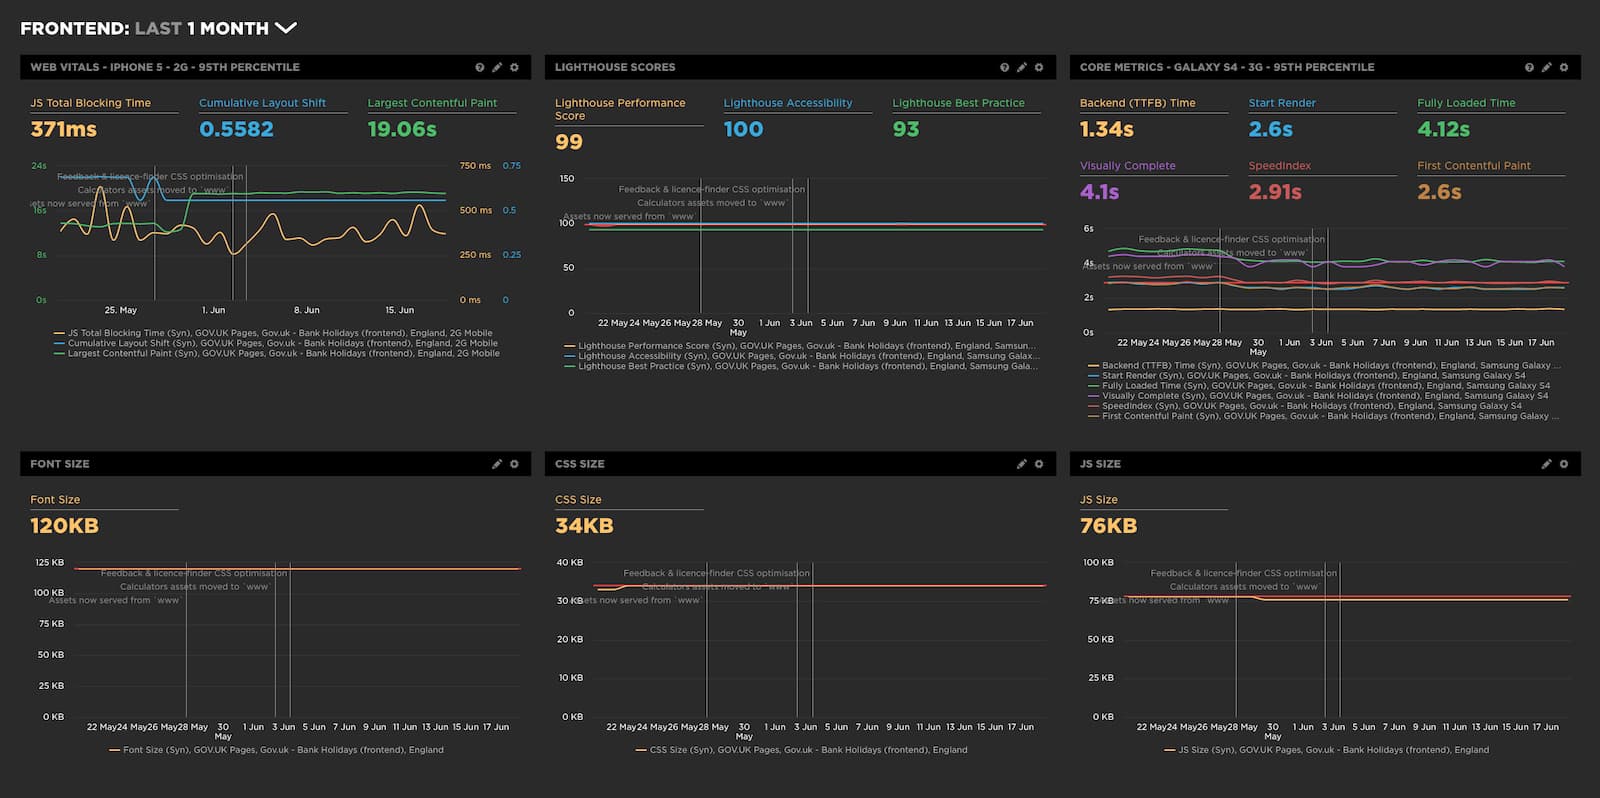 Example of a dashboard used for every GOV.UK application. We have Web Vitals, Lighthouse scores, core metrics on a Galaxy S4 on a 3G connection, Font size, CSS Size and JavaScript size.